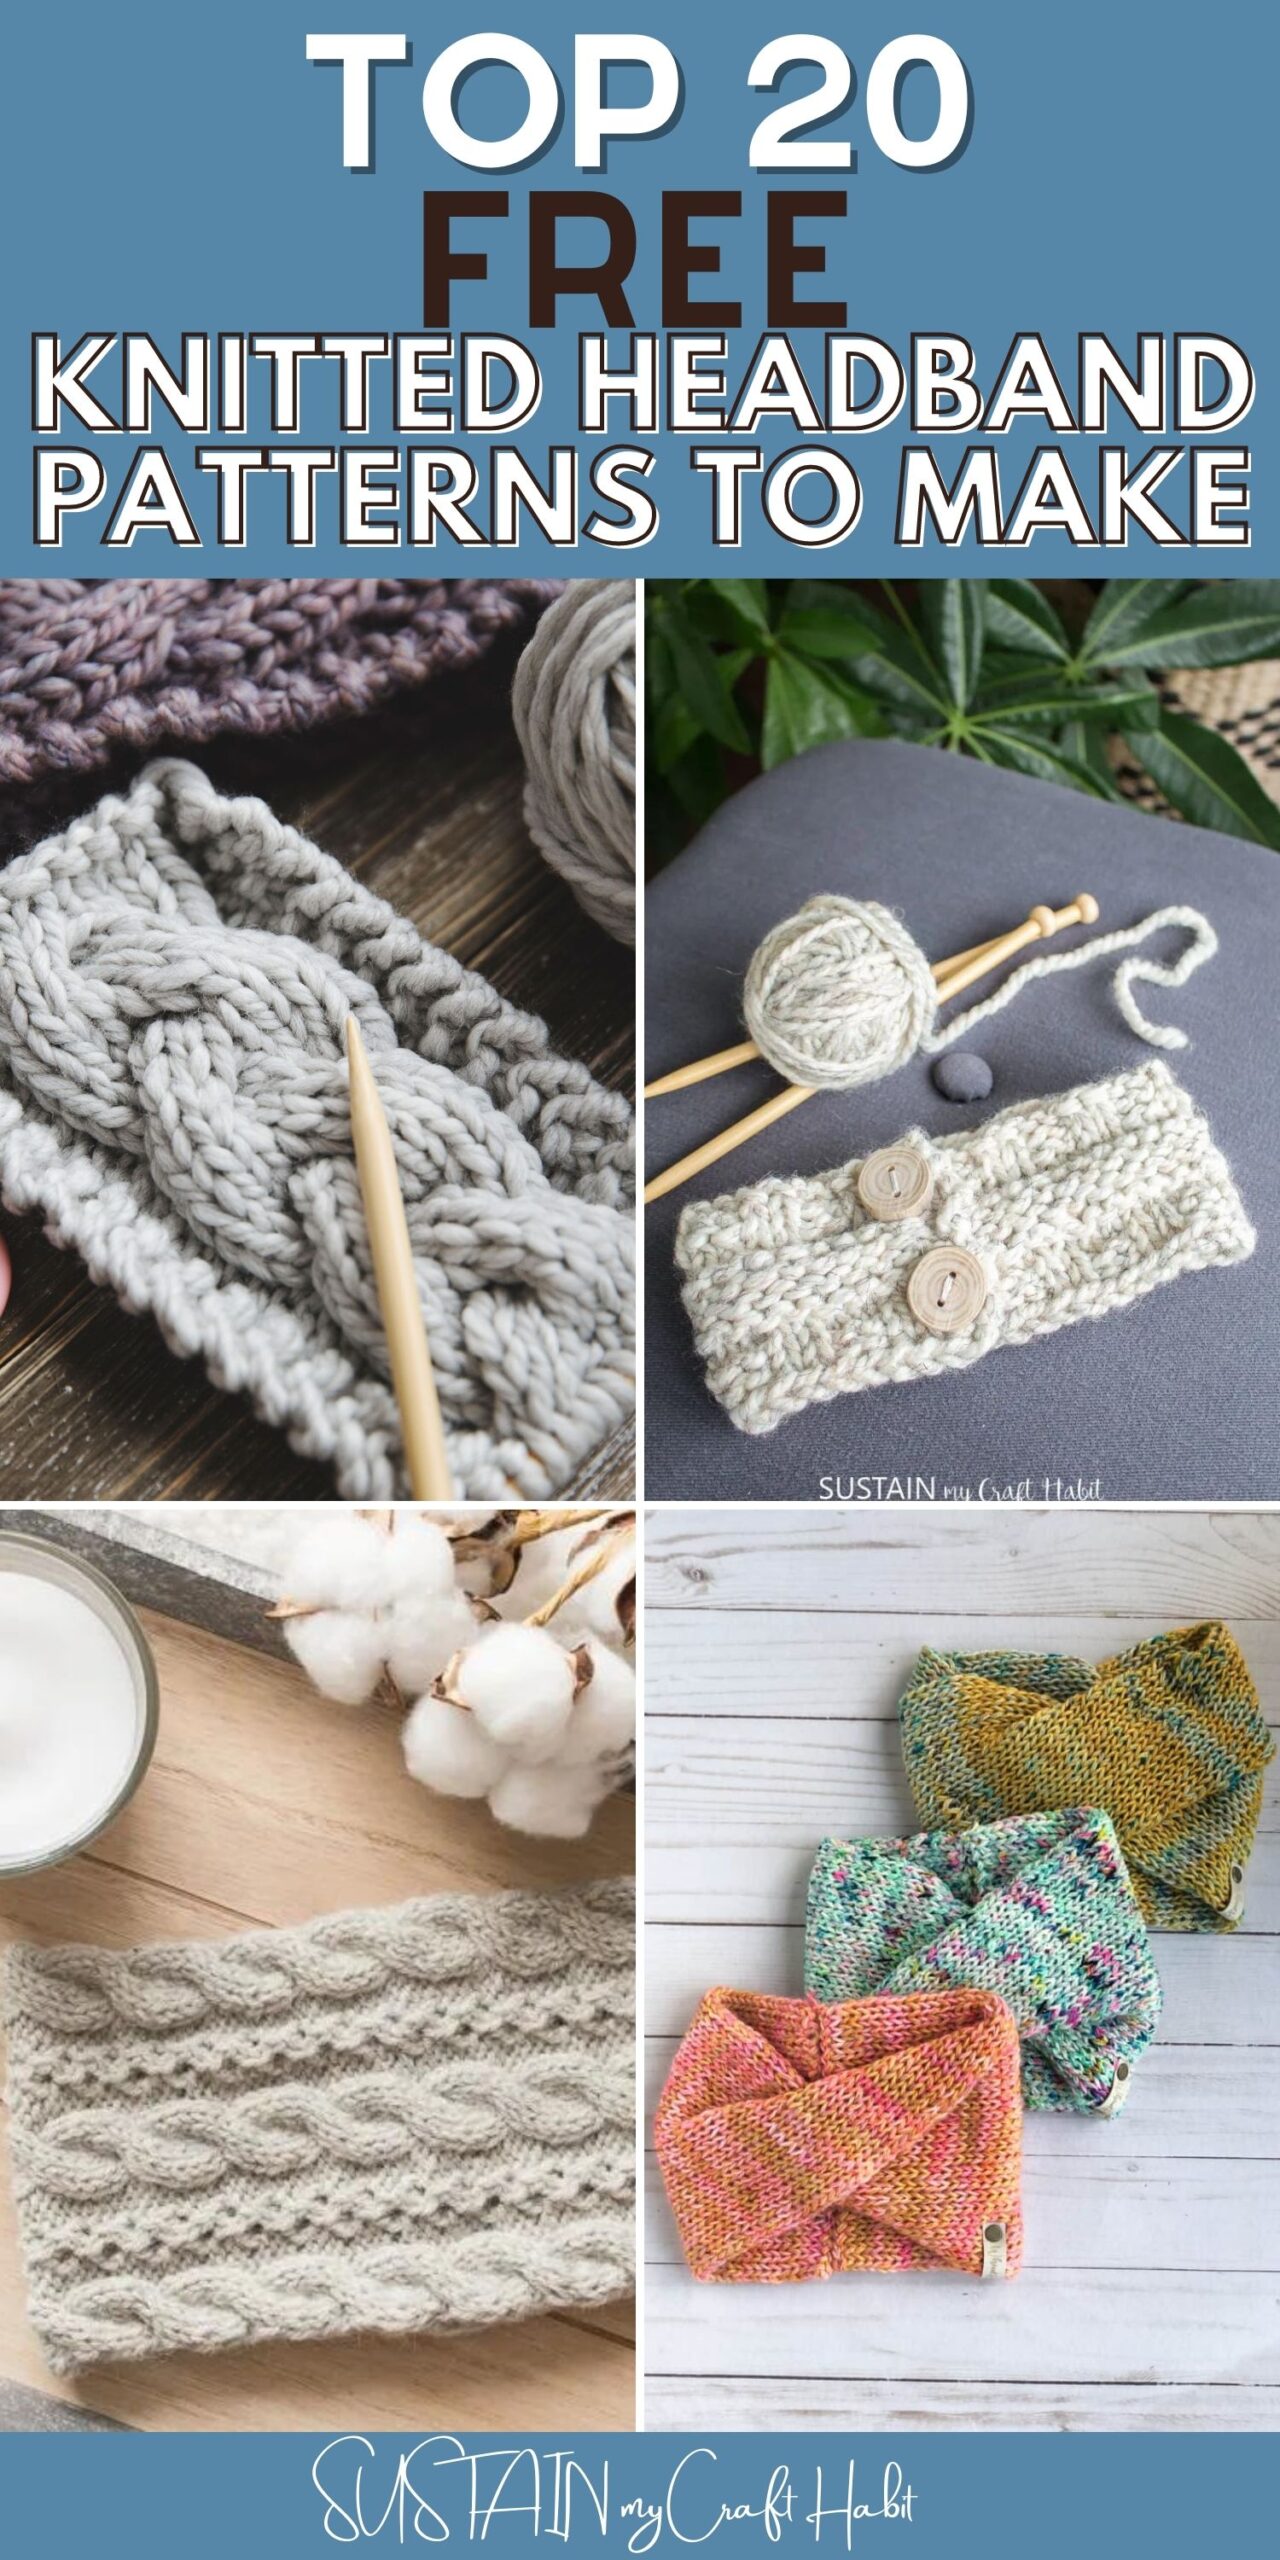 12 Free Knitted Headband Patterns for Adults – Sustain My Craft Habit